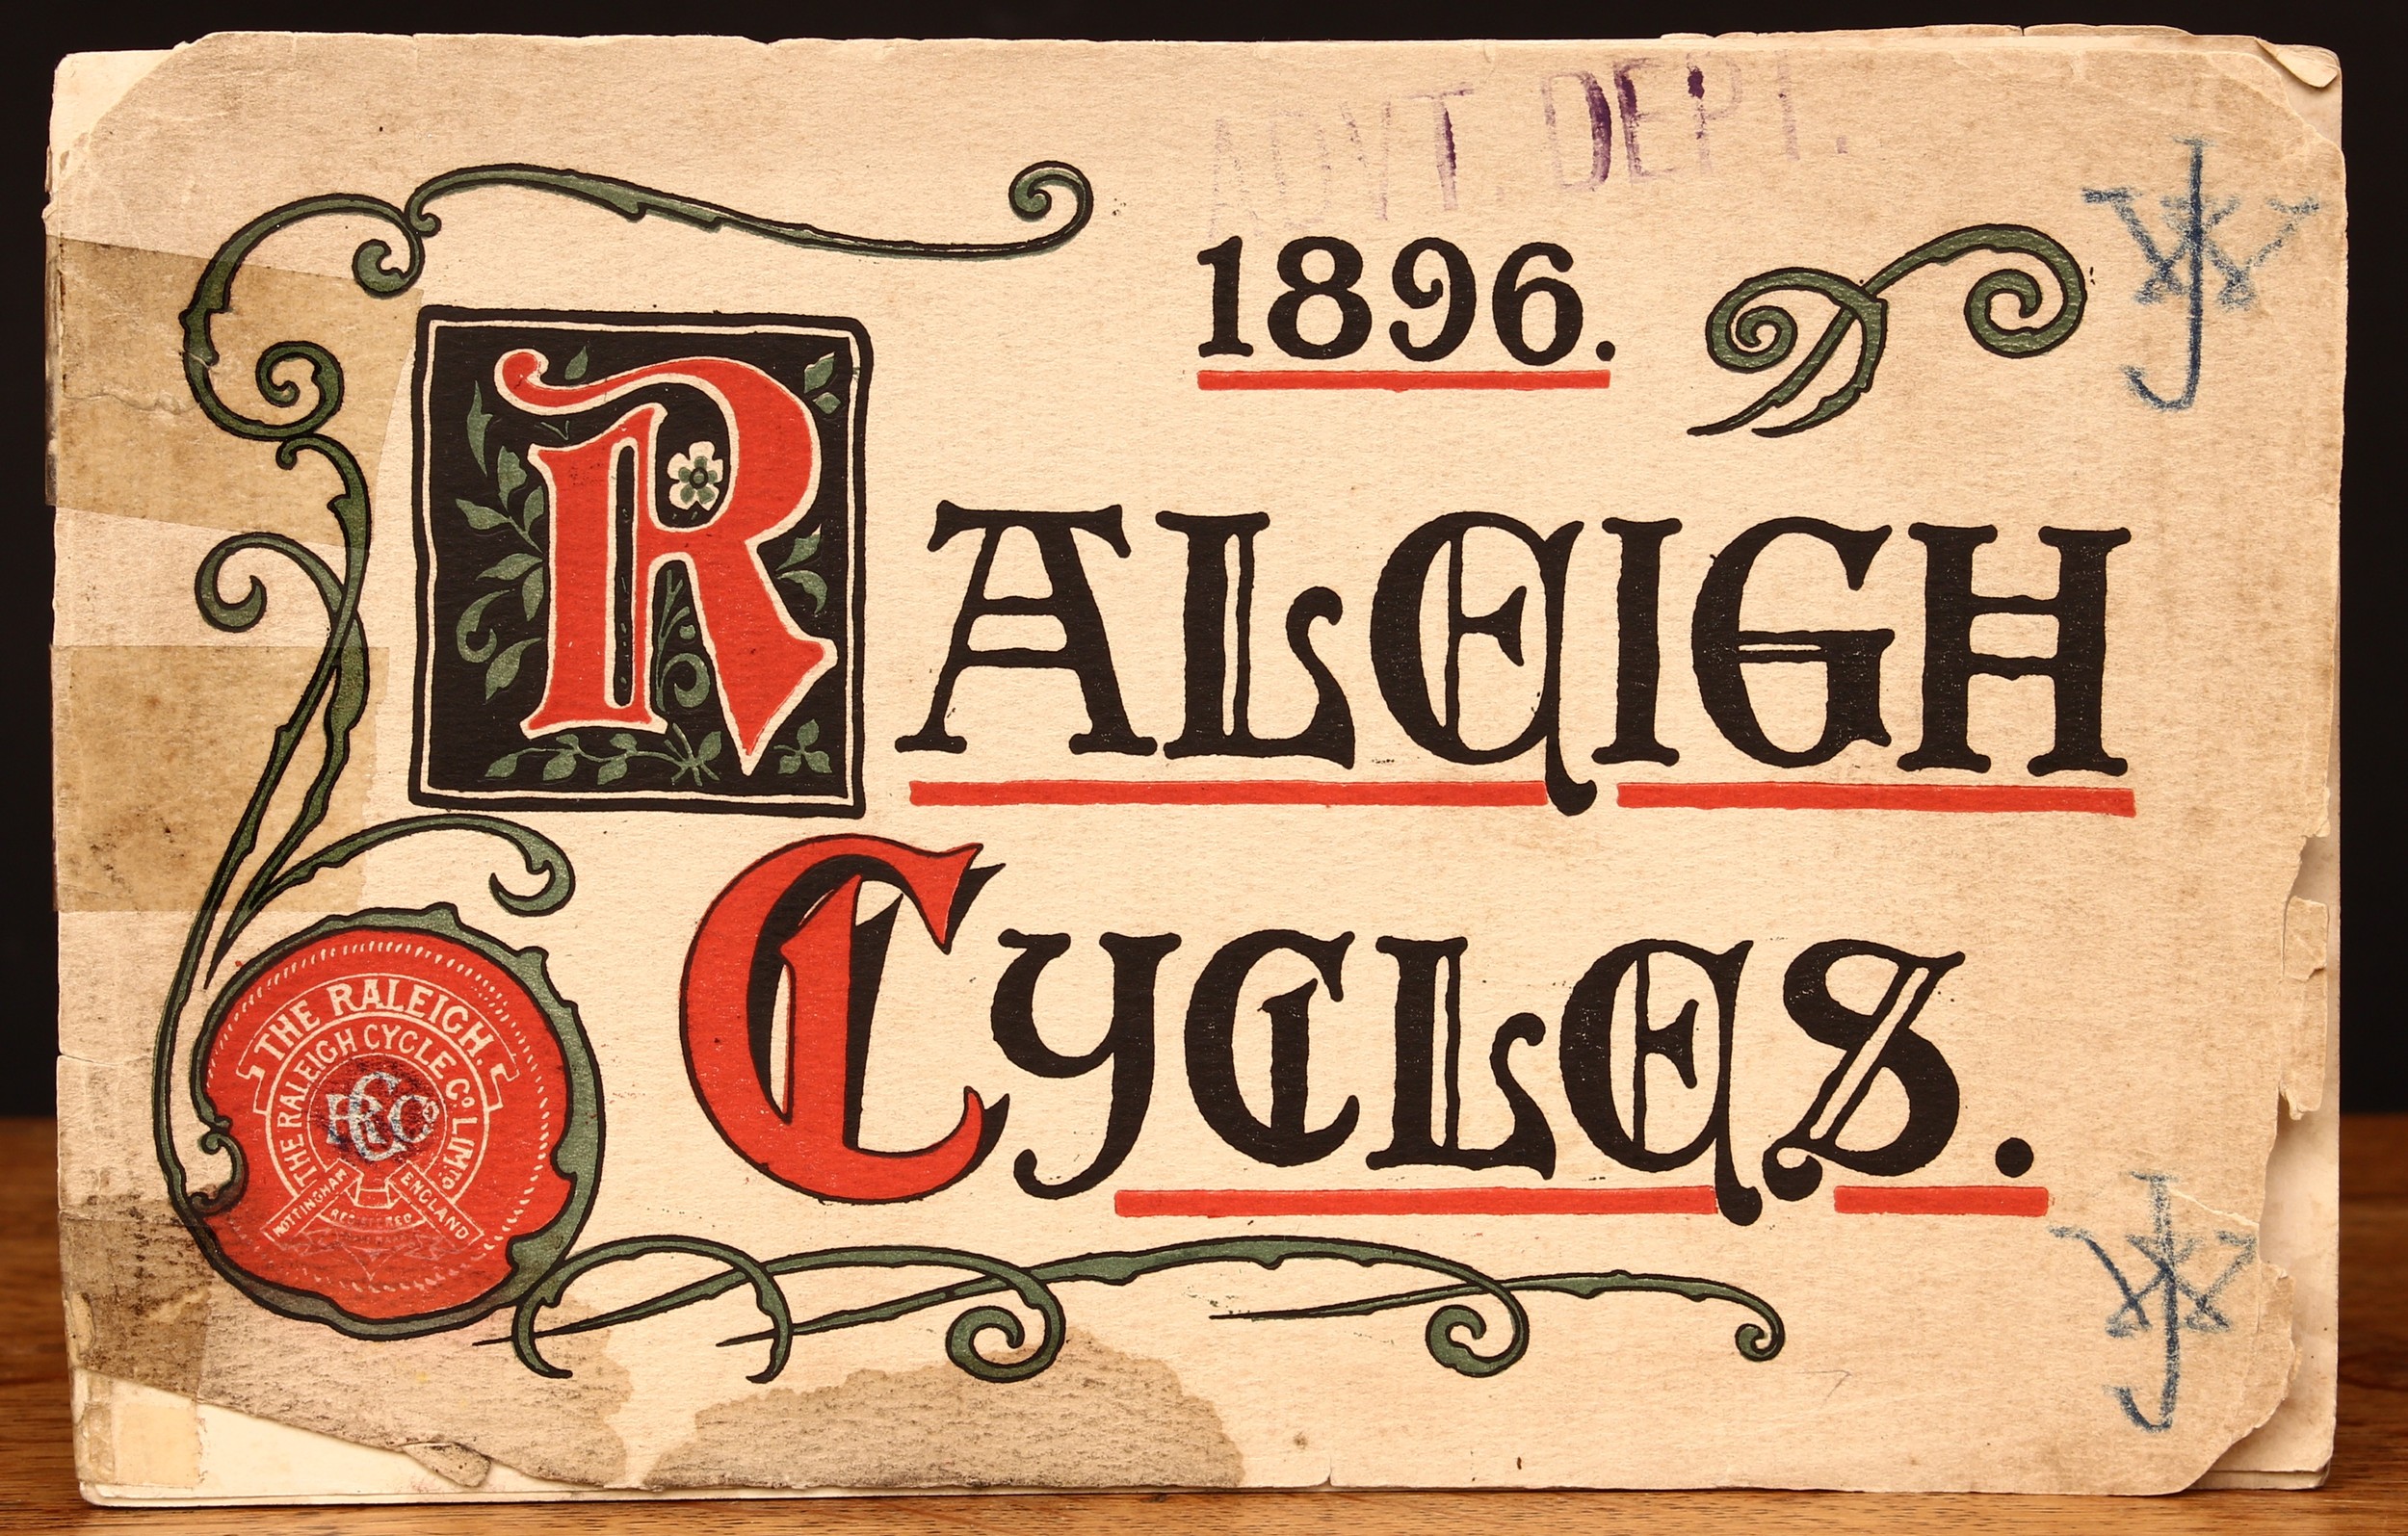 Sport & Advertising, Cycling, Raleigh/Lenton Raleigh - The Raleigh Cycle Co. Limited Nottingham 1896